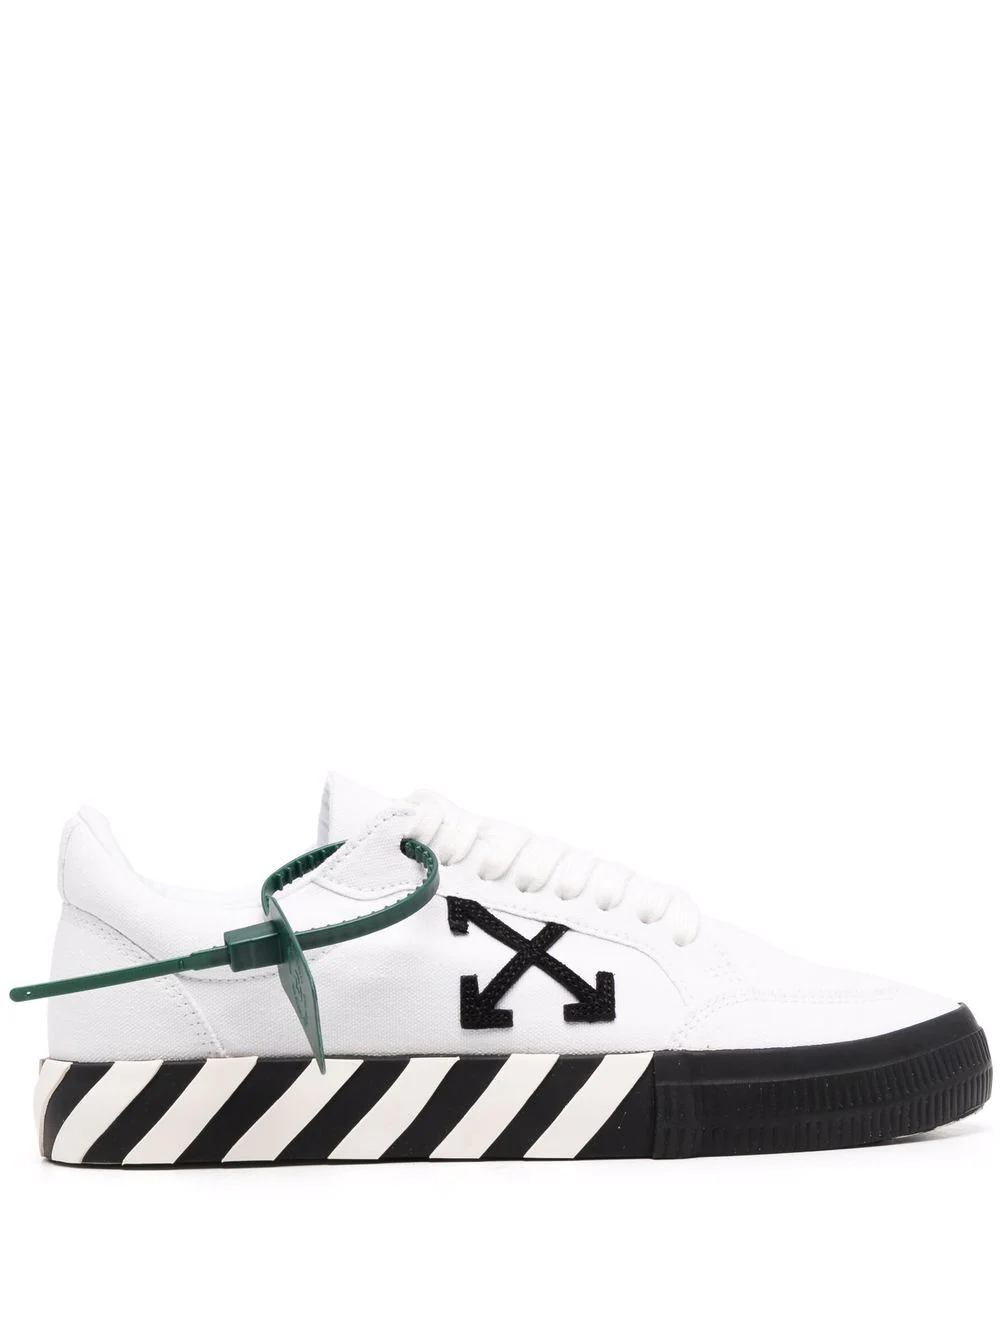 OFF-WHITE LOW SNEAKERS